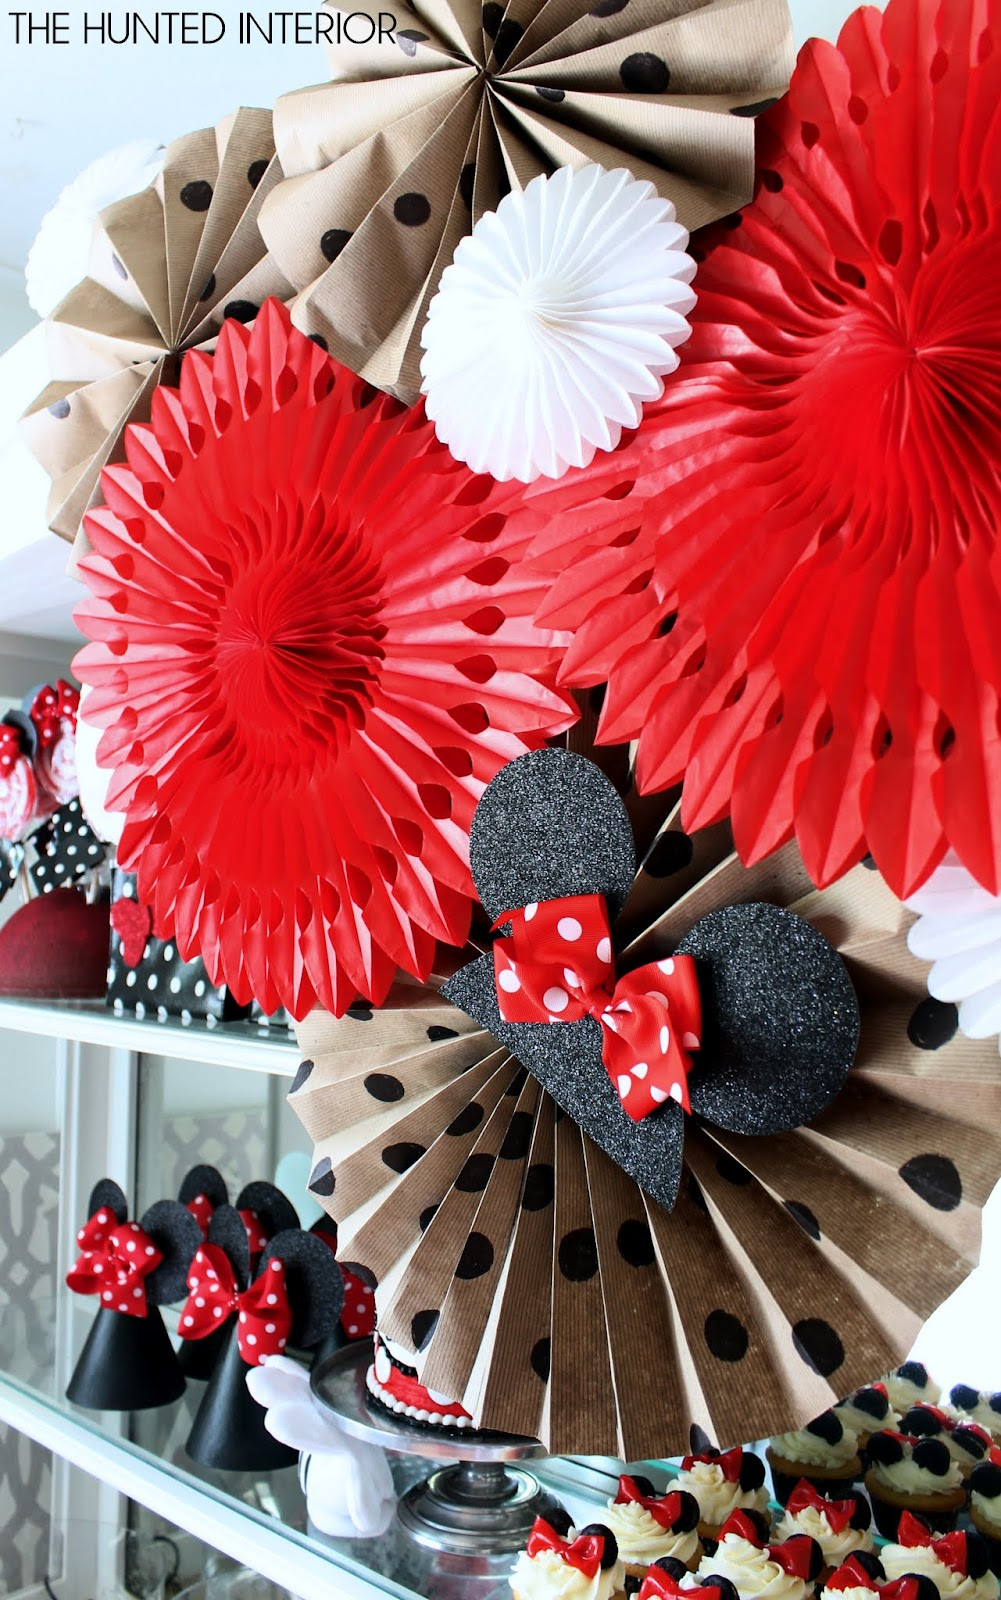 Minnie Birthday Party Ideas
 hunted interior Minnie Mouse Birthday Party